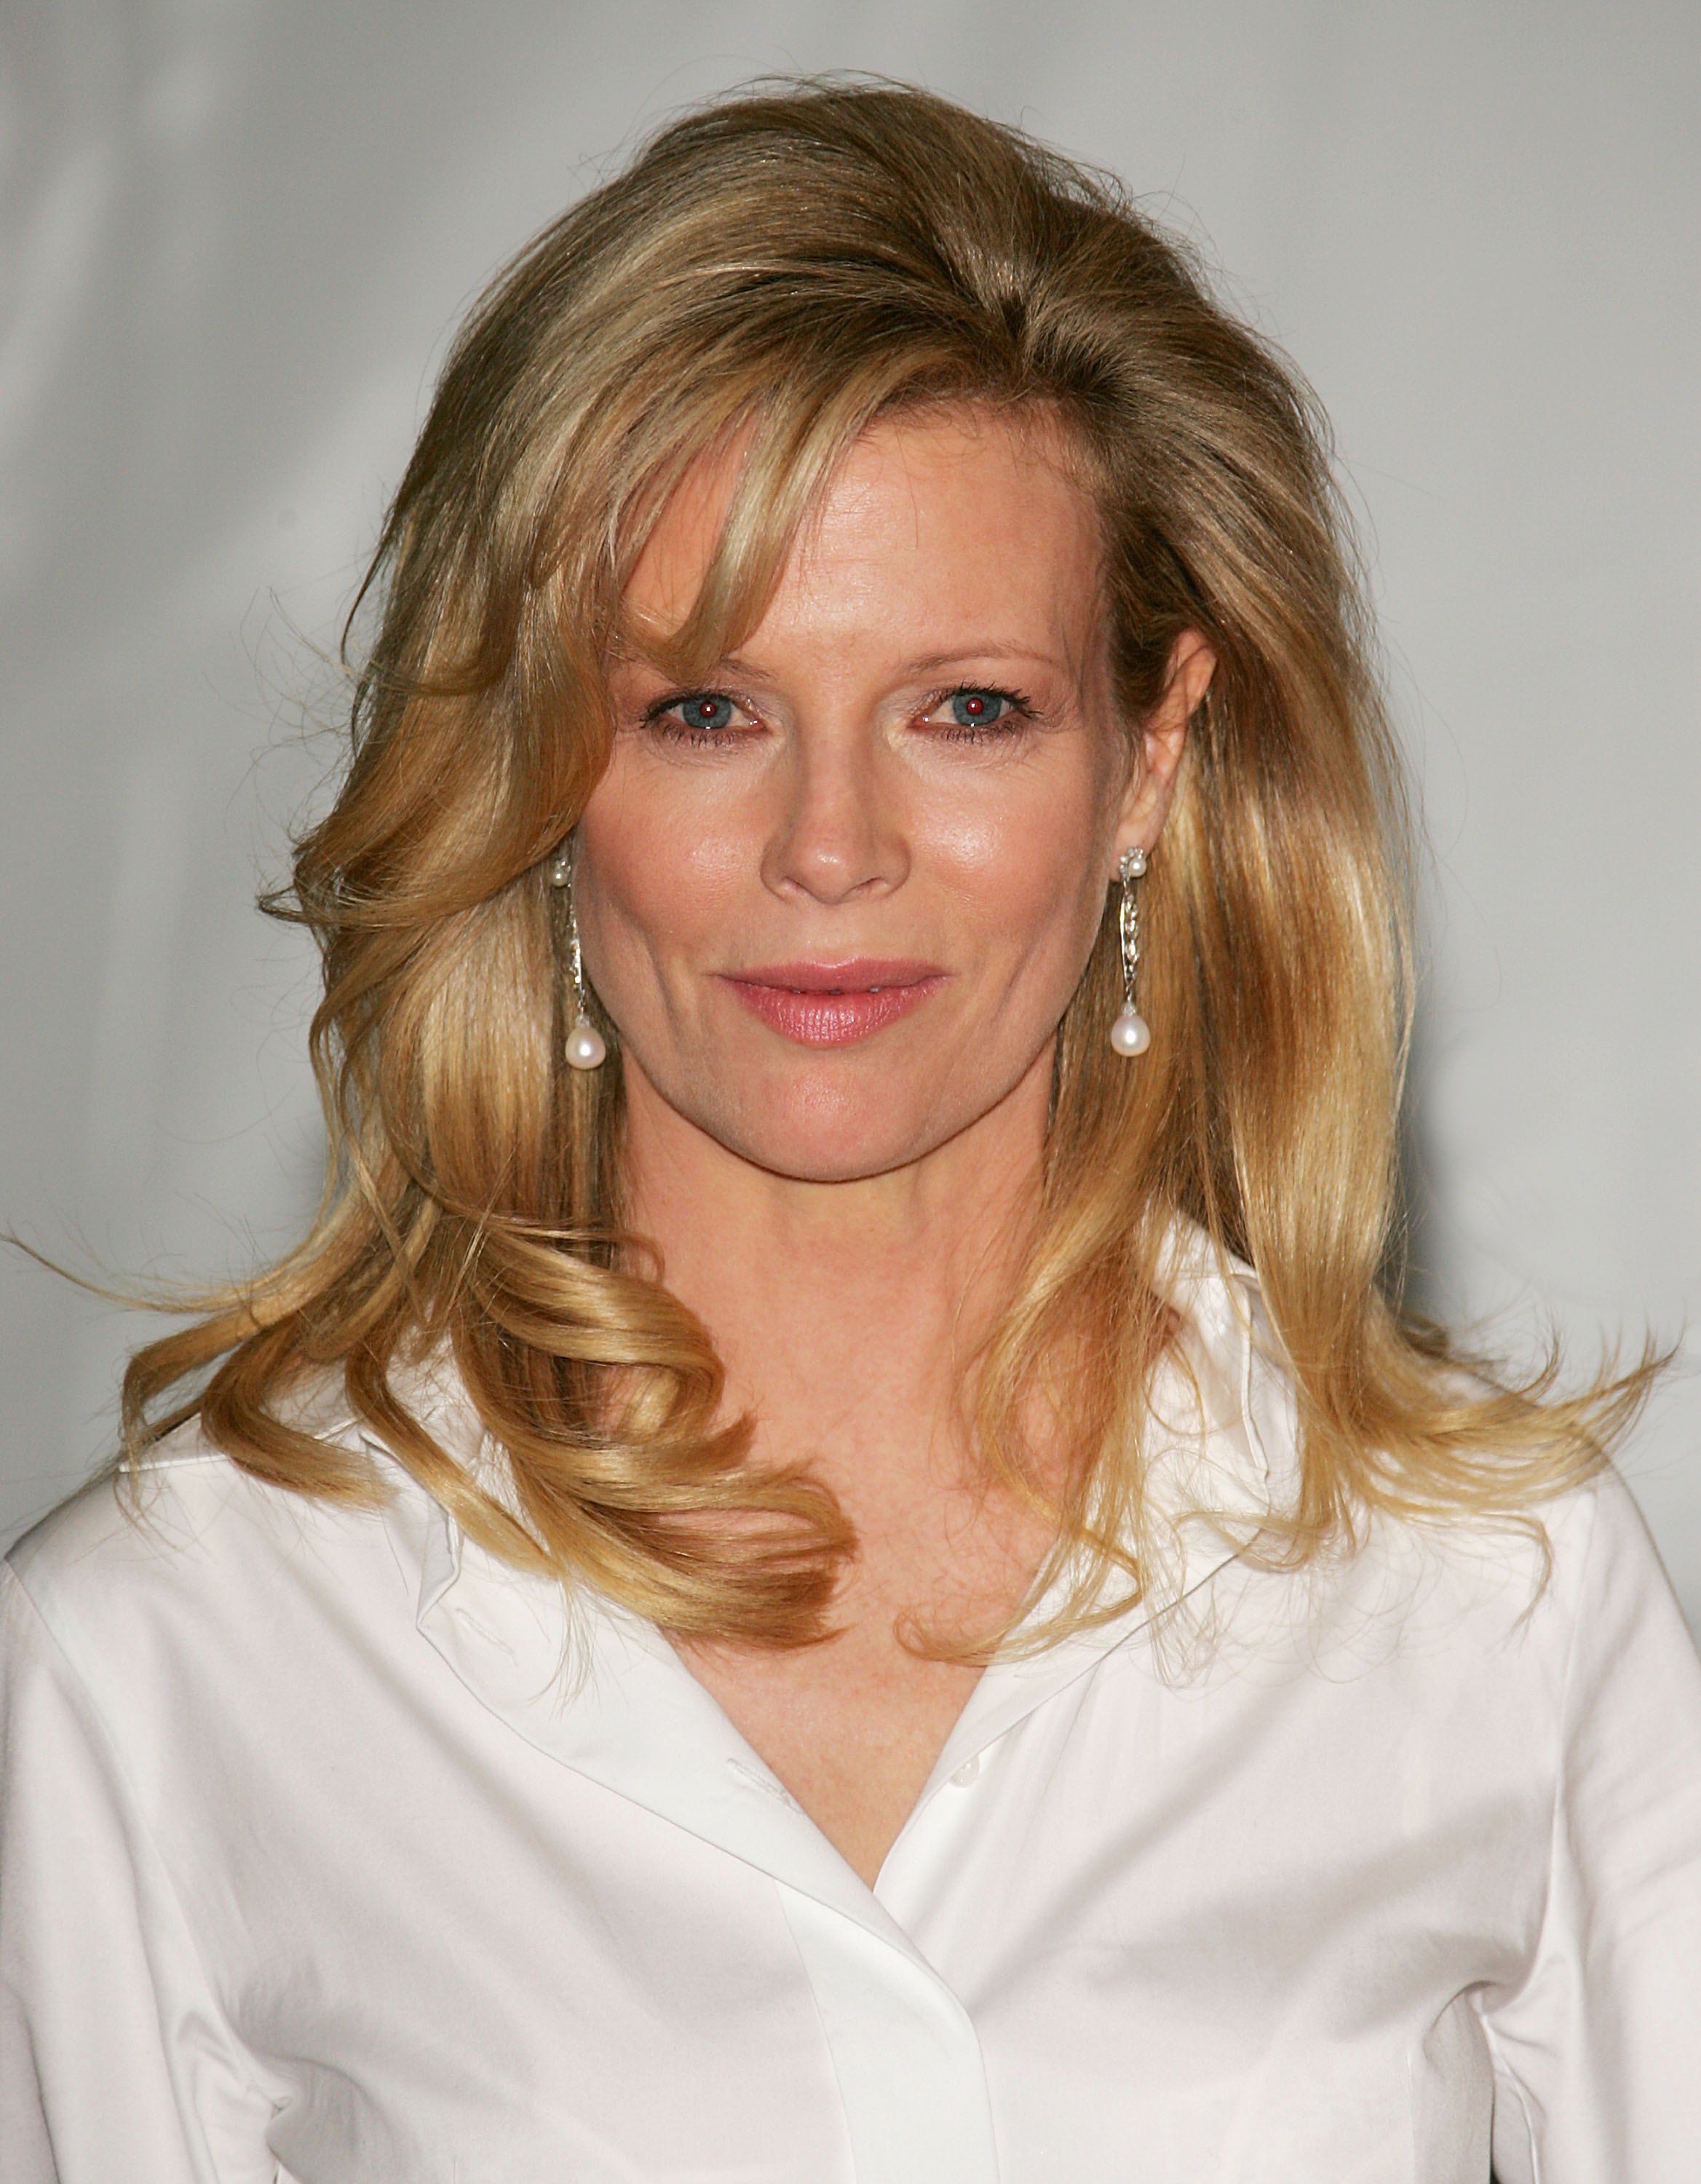 Kim Basinger attends the Metropolitan Museum of Art Costume Institute Benefit Gala. | Source: Getty Images